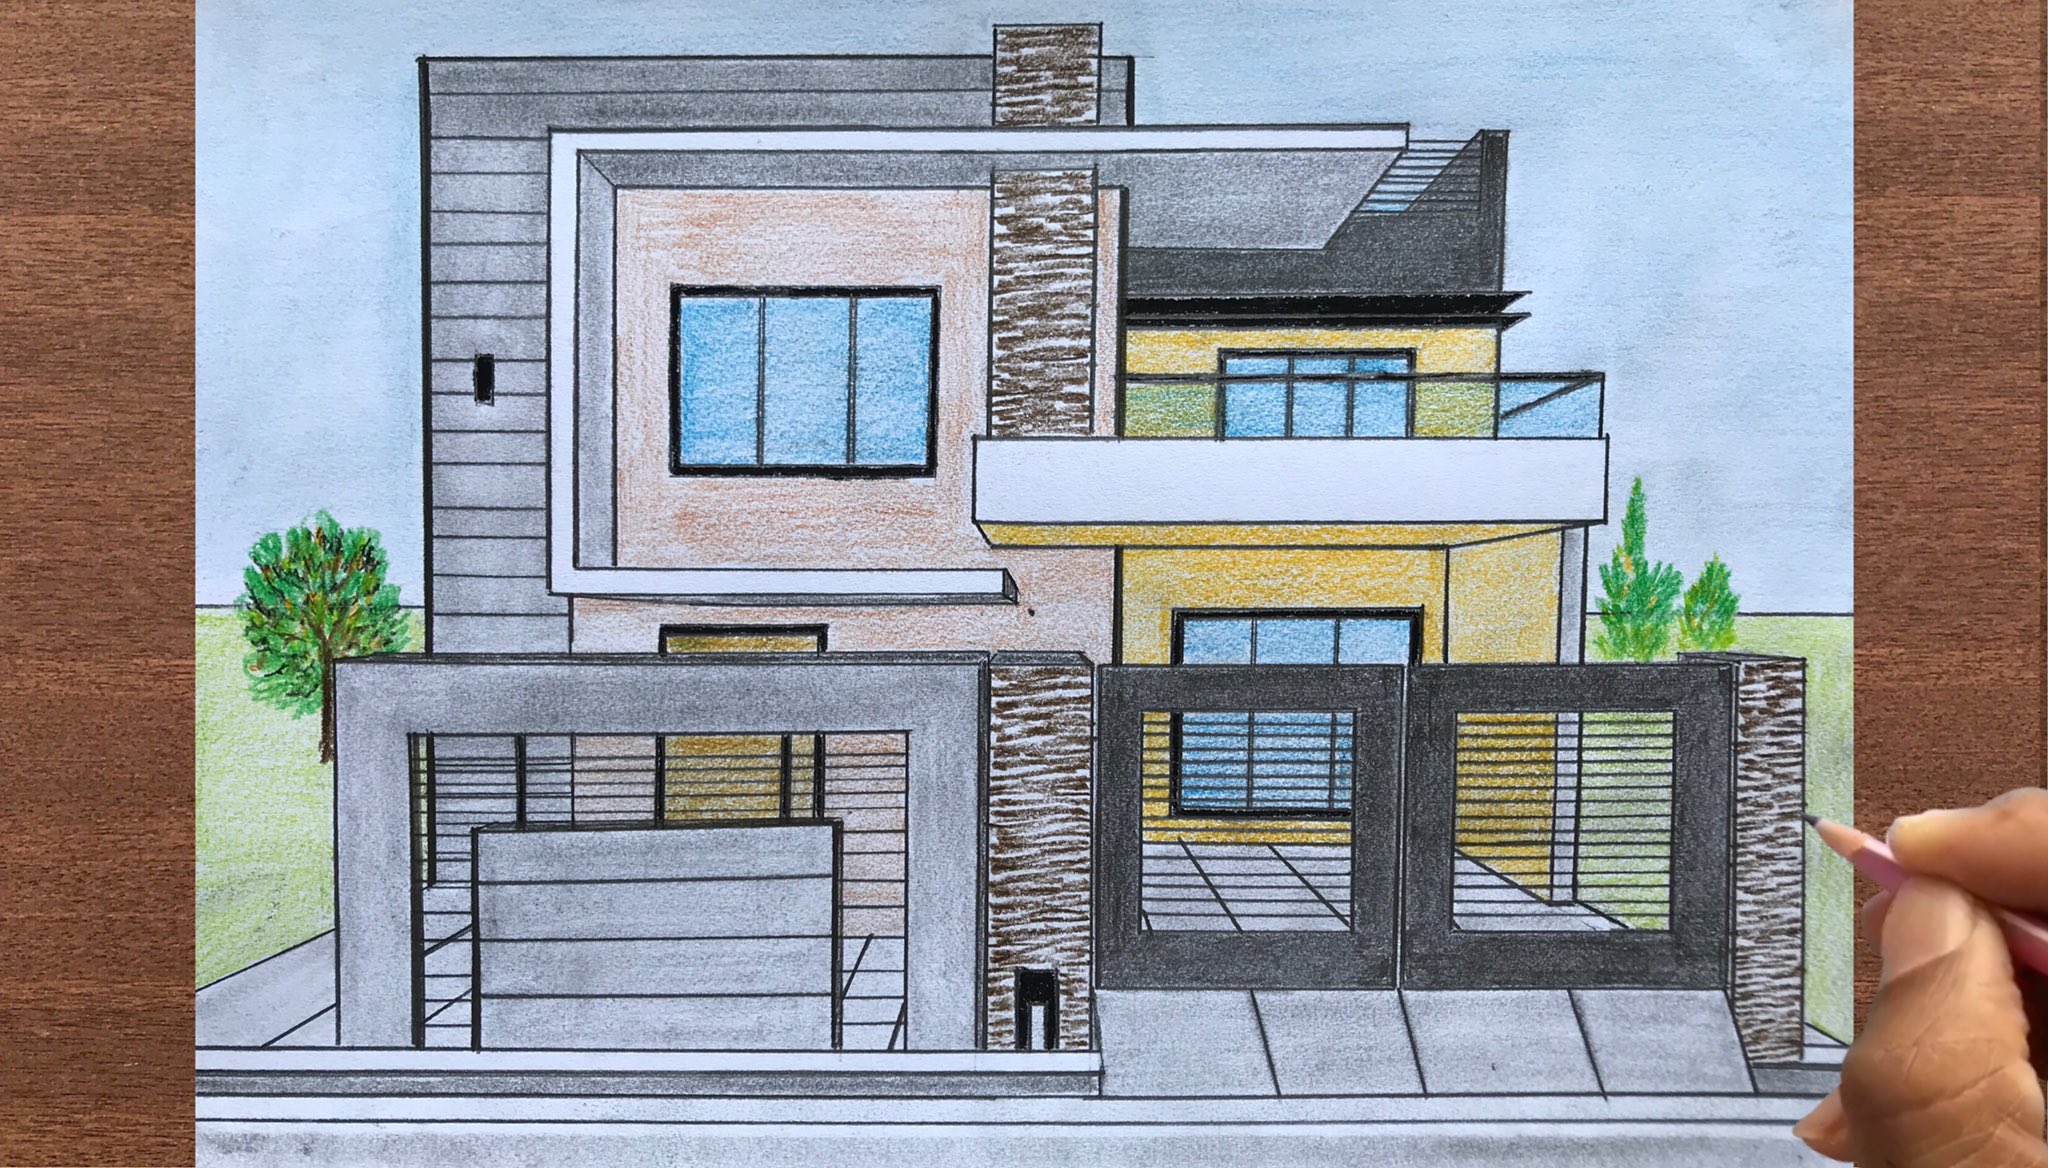 House Drawing Tutorial - How to draw a House step by step